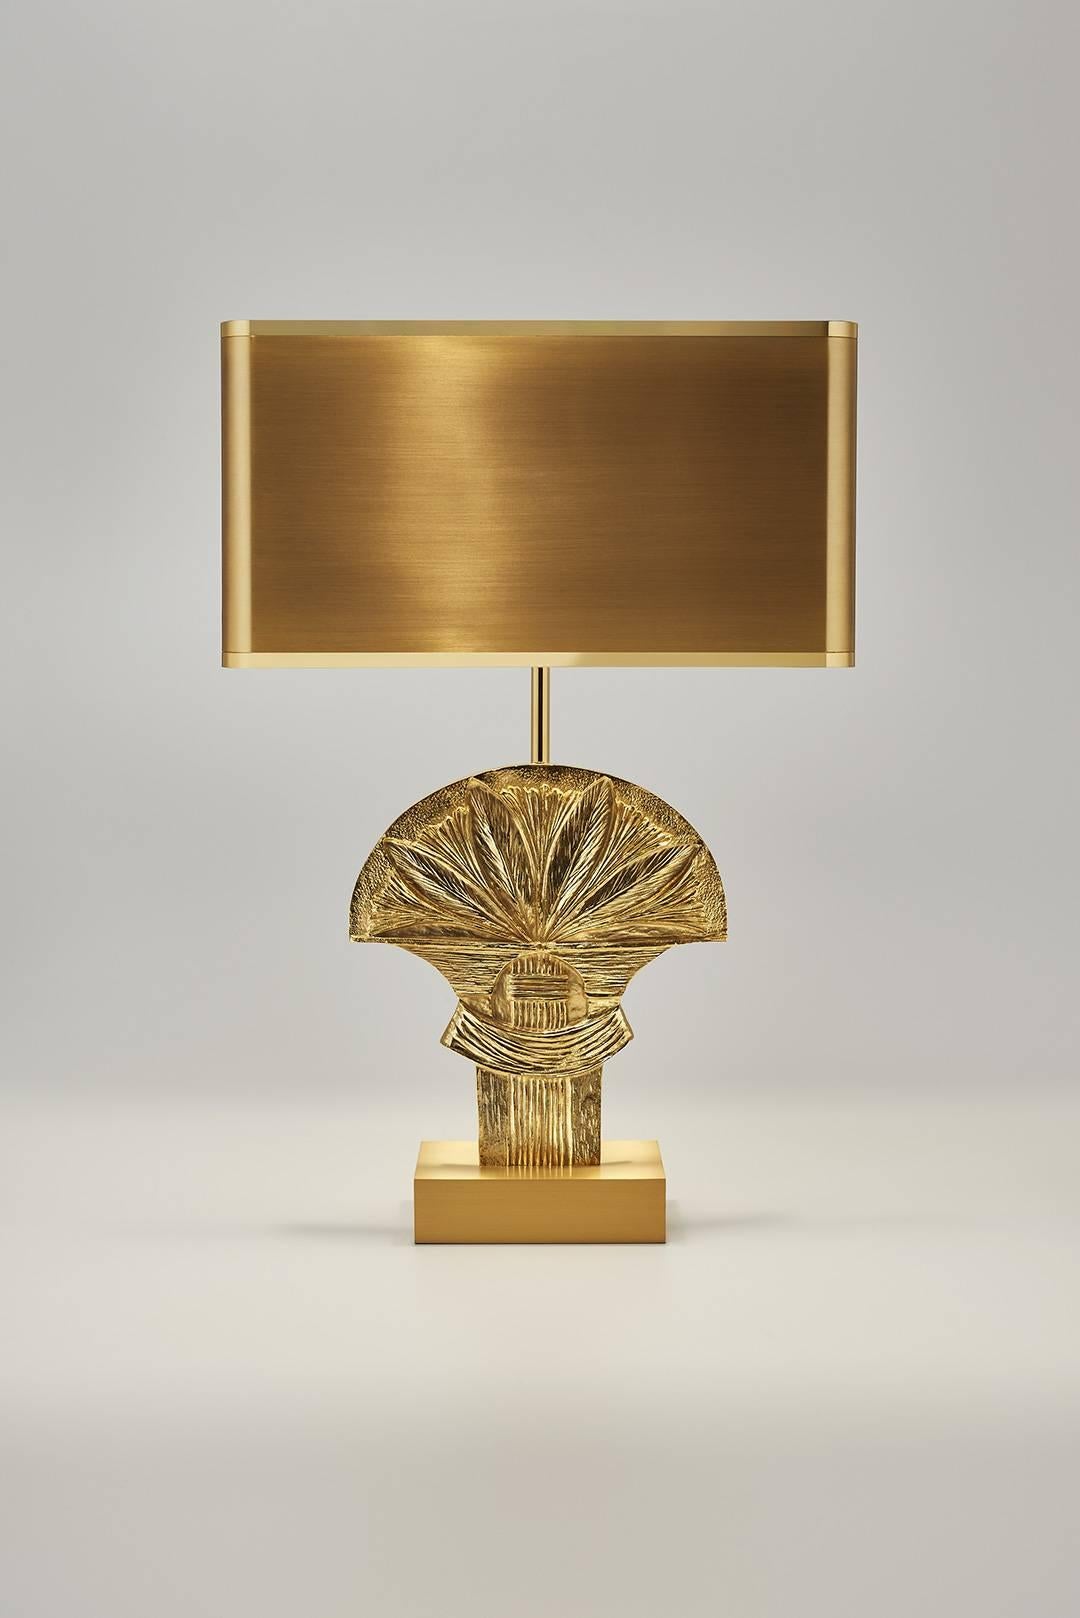 Table lamp made of brass, with brass shade, designed by Chrystiane Charles, signed and numbered, made in France. Rare: Edited only 2 times.